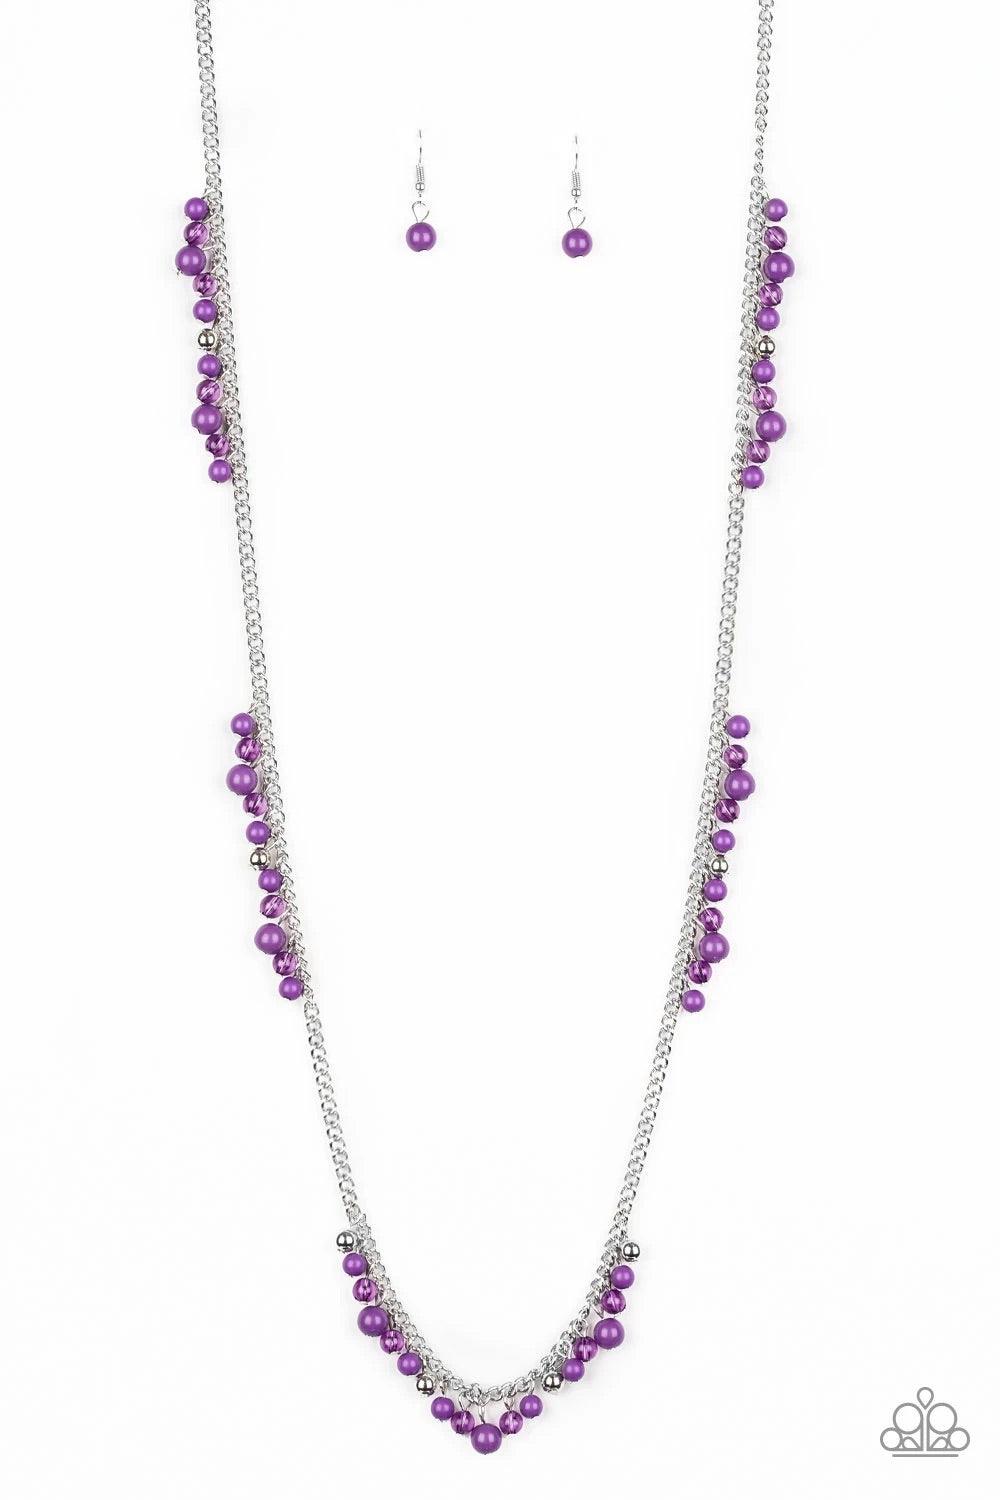 Paparazzi Accessories Miami Mojito - Purple Sections of shiny silver, polished purple, and glassy beads trickle along a shimmery silver chain along the chest for a flirtatious look. Features an adjustable clasp closure. Sold as one individual necklace. In